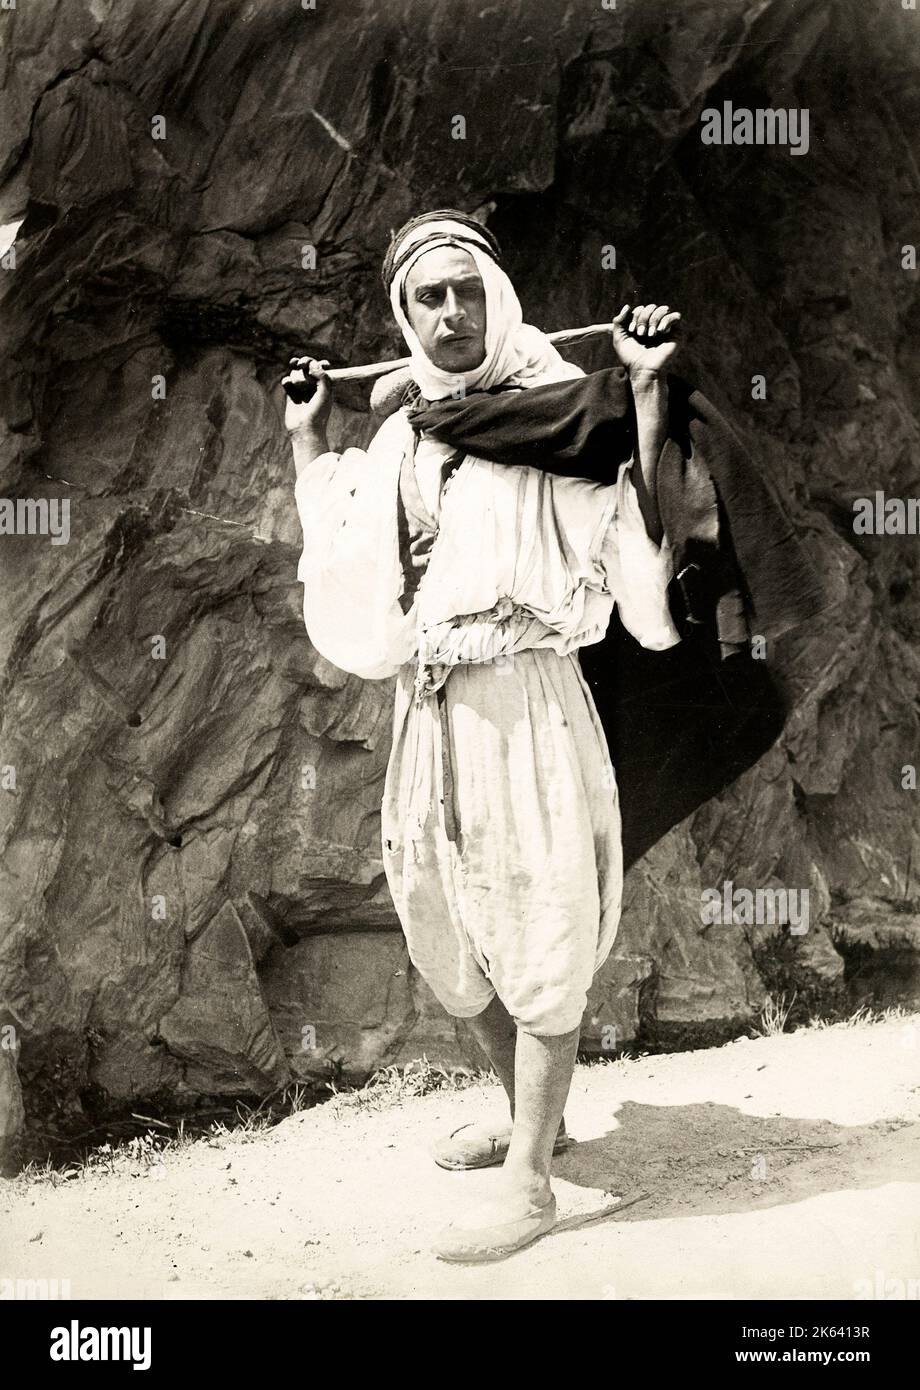 19th century vintage photograph: Kabyle - Arab man in Algeria, North Africa Stock Photo